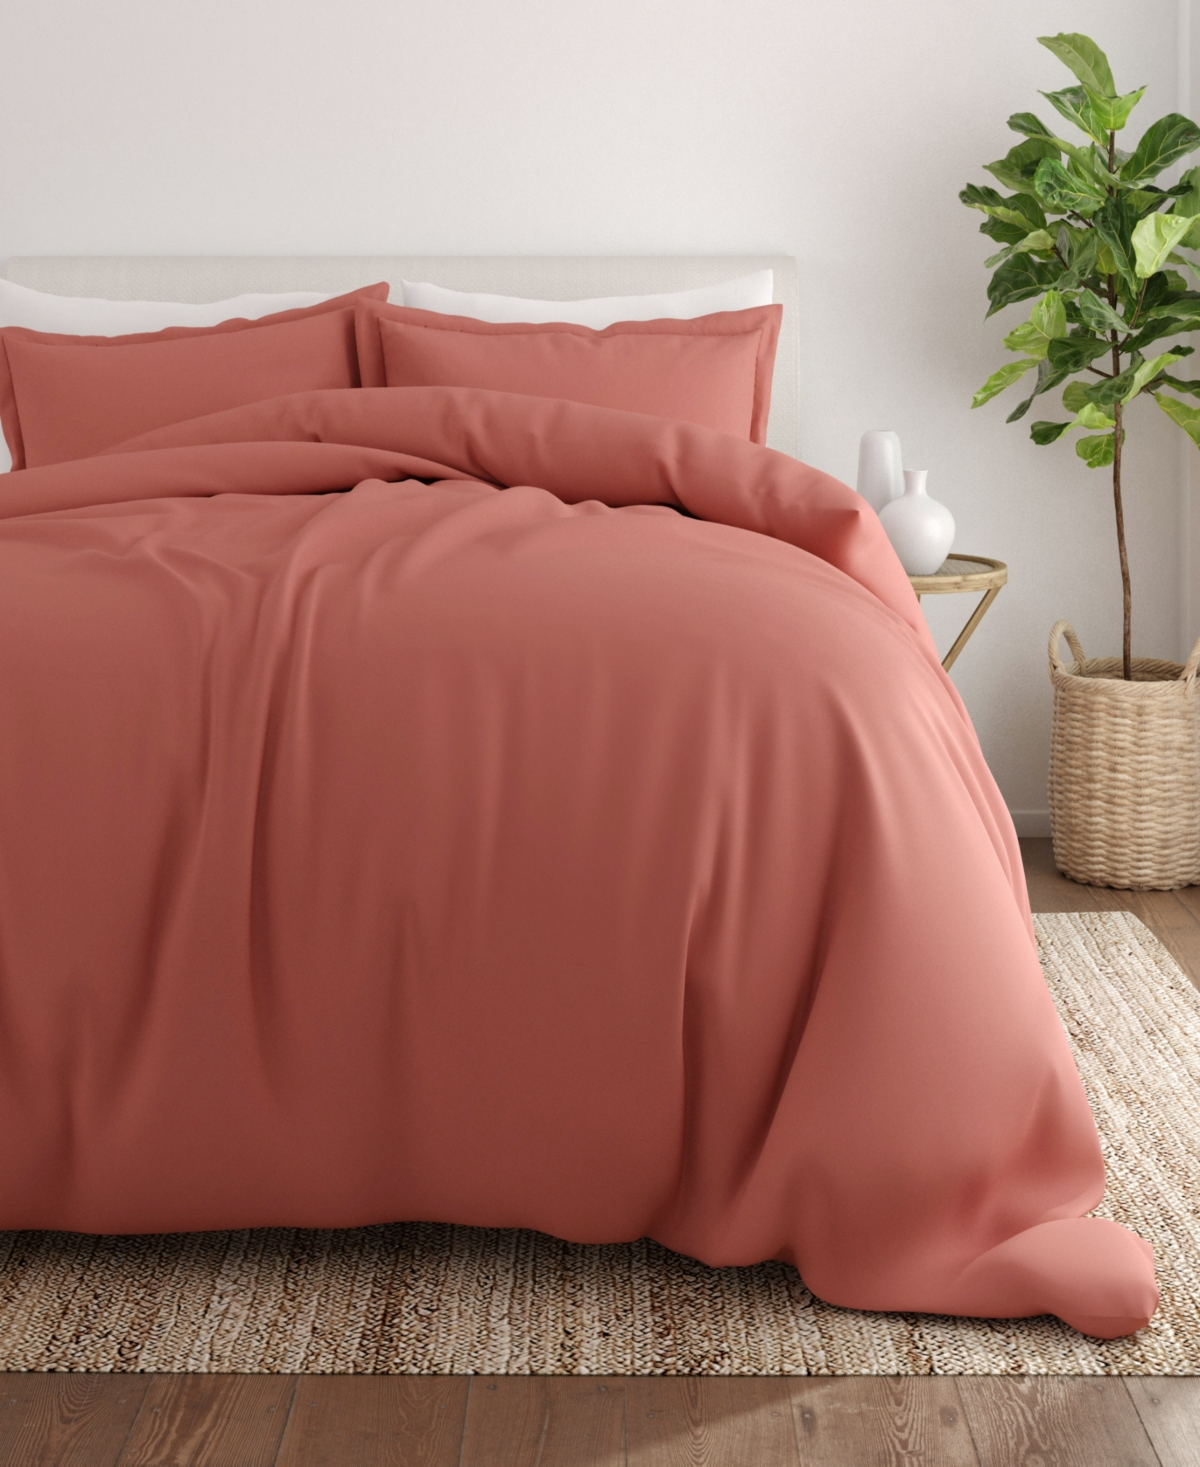 Ienjoy Home Dynamically Dashing Duvet Cover Set By The Home Collection, Full/queen In Clay